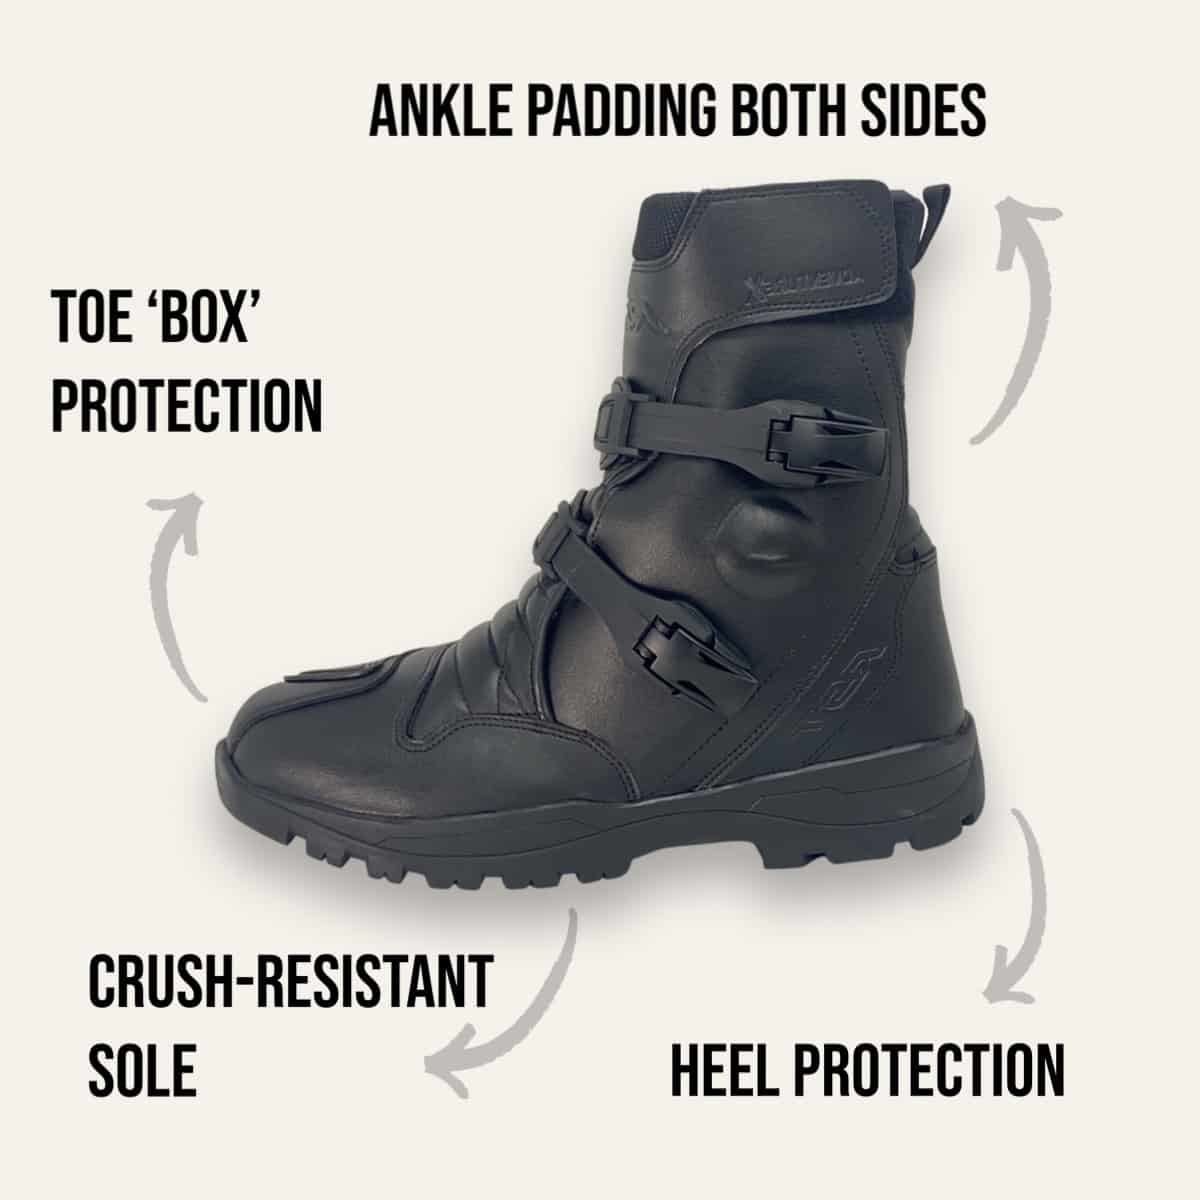 RST Adventure-X Mid Boots: A shorter version of RST's best-selling adventure touring boots - protection